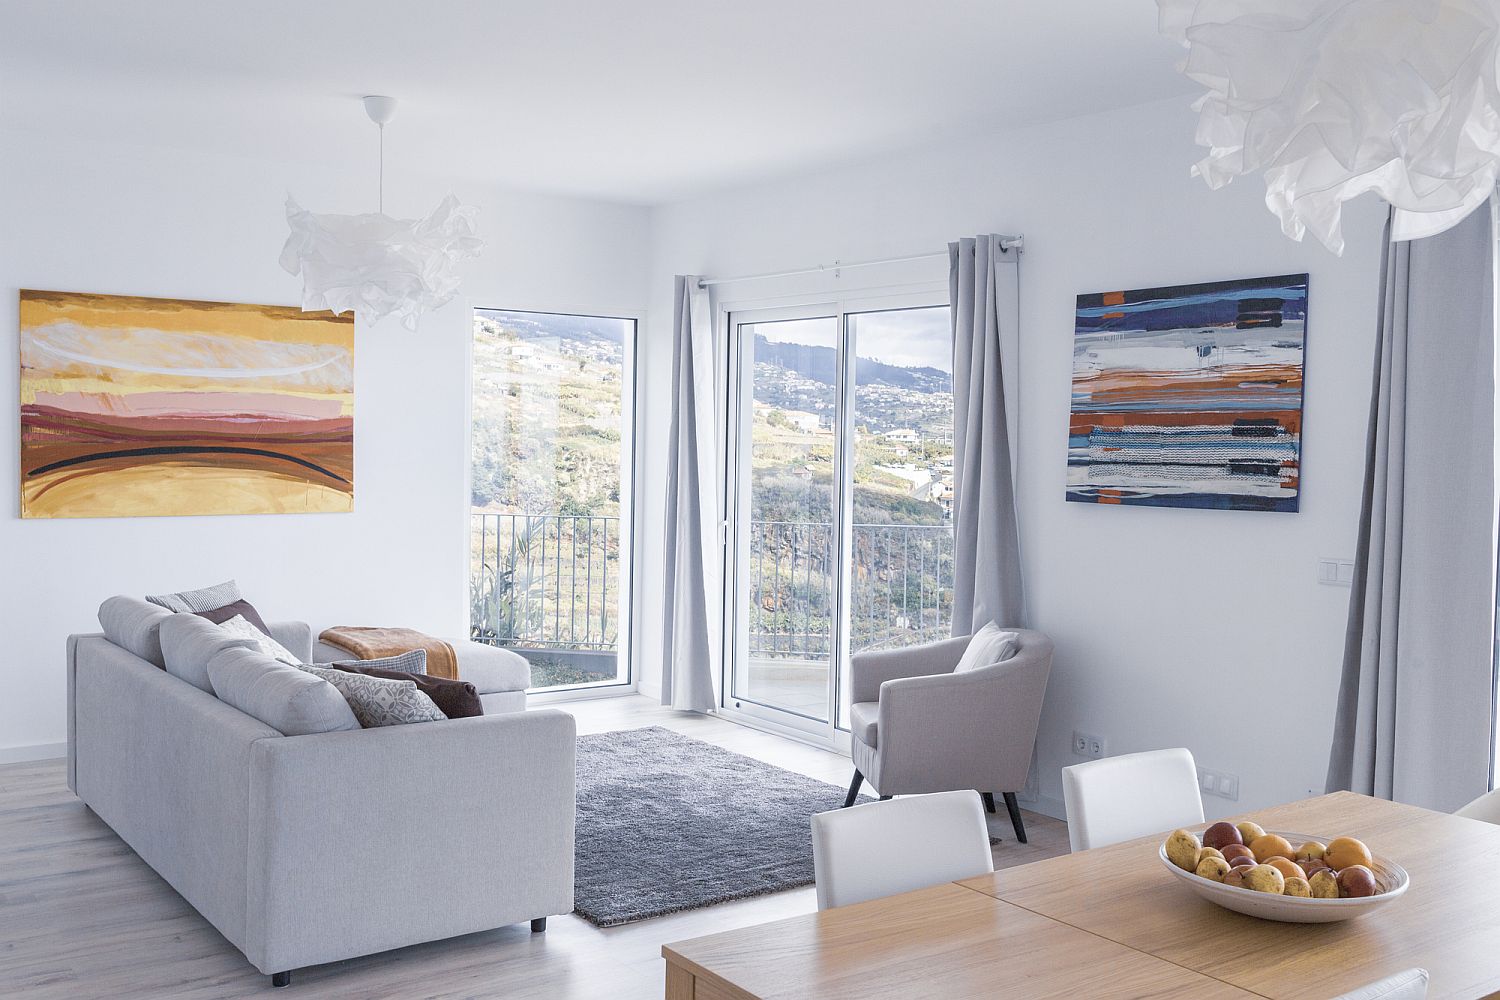 Paintings add color to the white living room